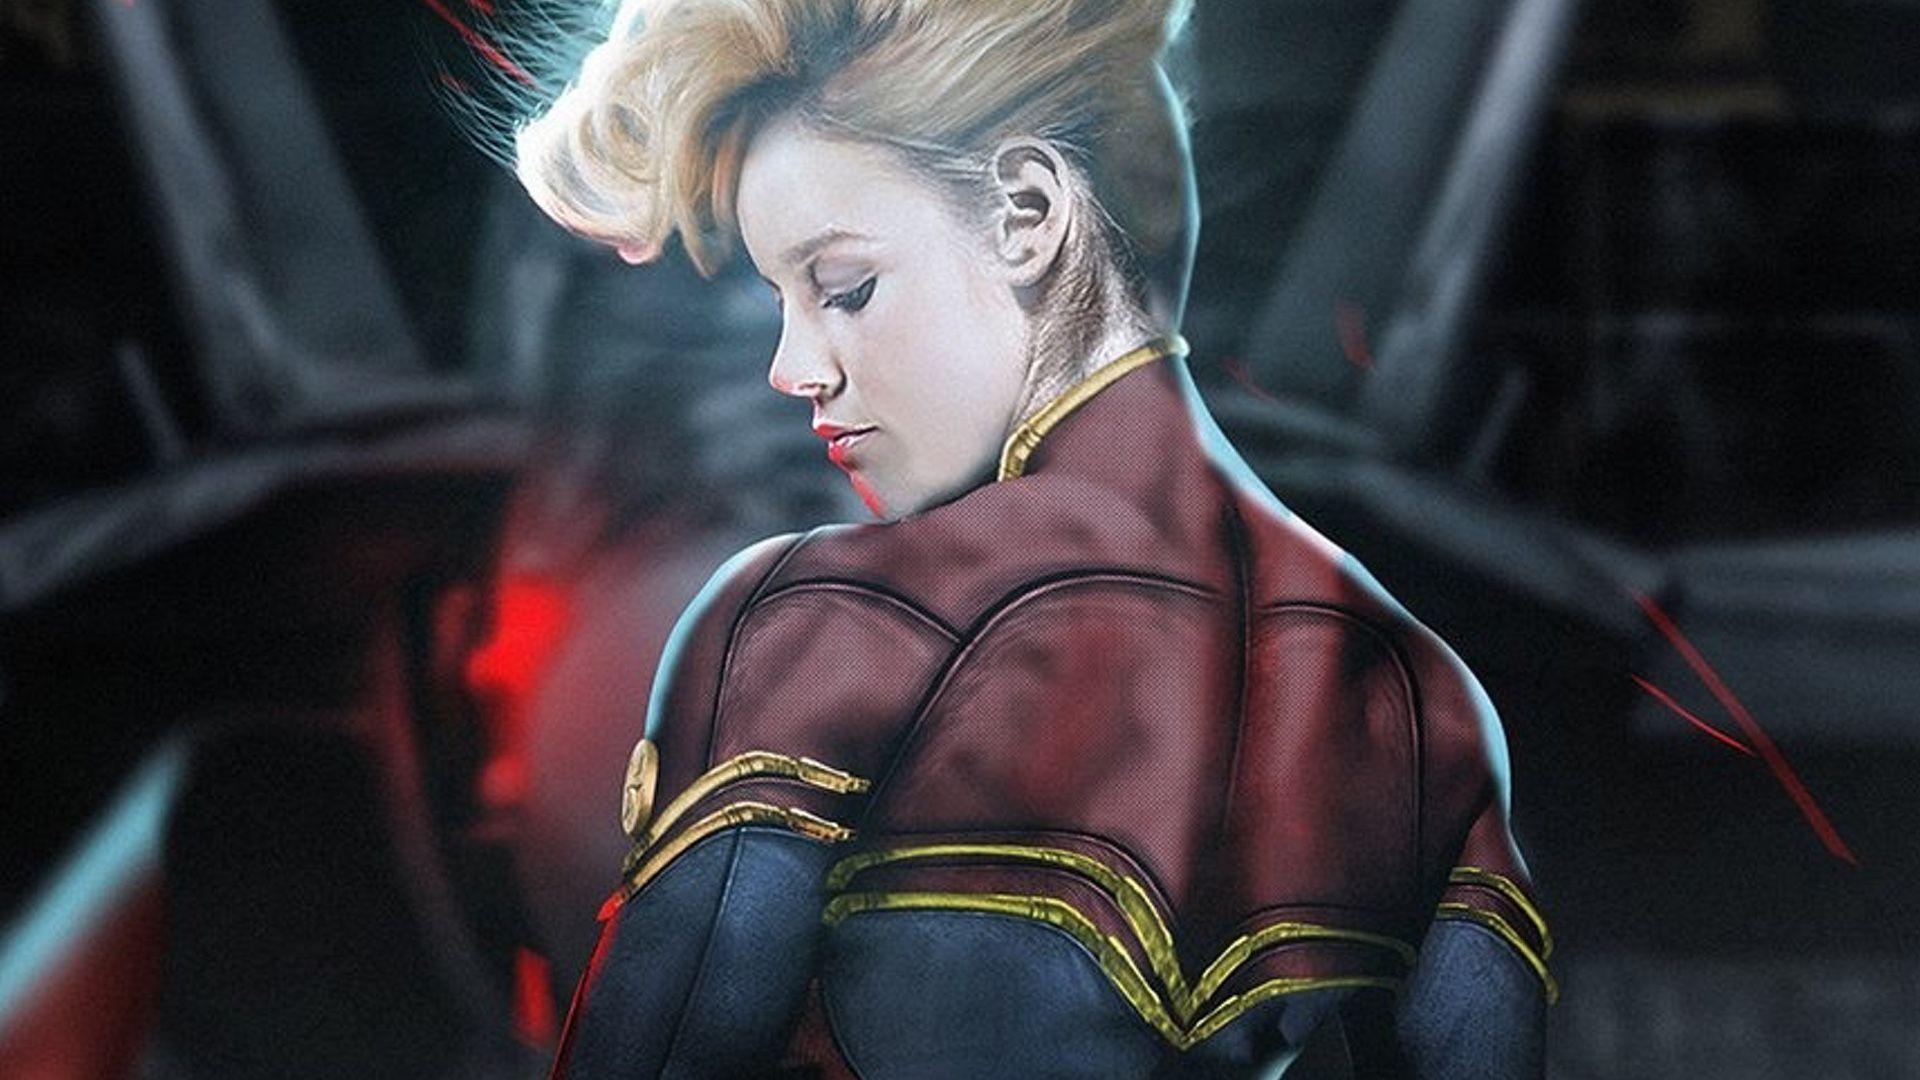 Brie Larson Explains Why She Took on the Role of CAPTAIN MARVEL